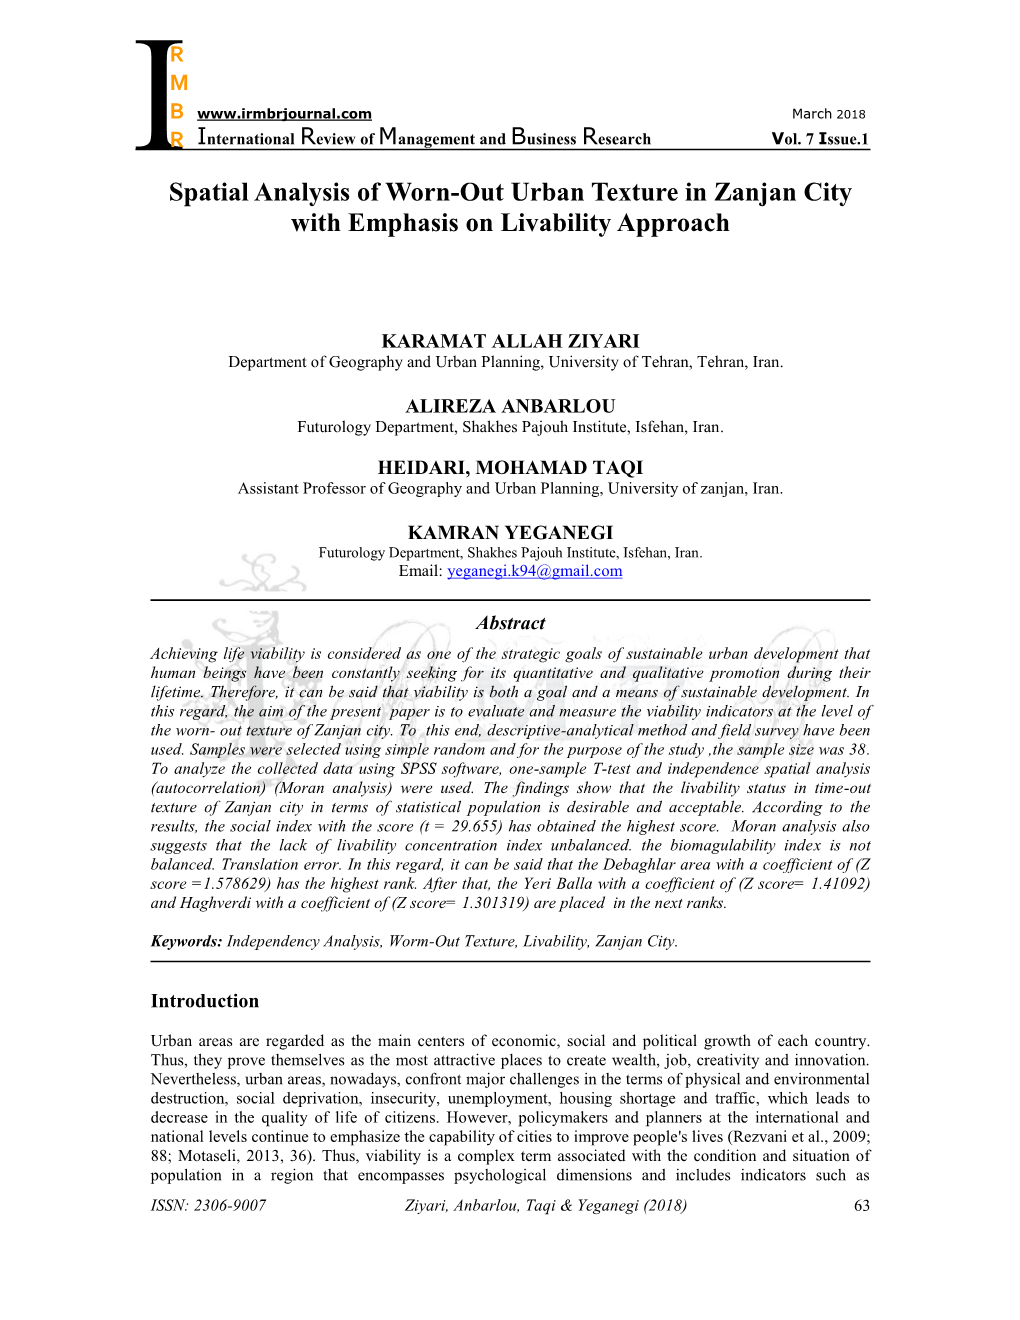 Spatial Analysis of Worn-Out Urban Texture in Zanjan City with Emphasis on Livability Approach